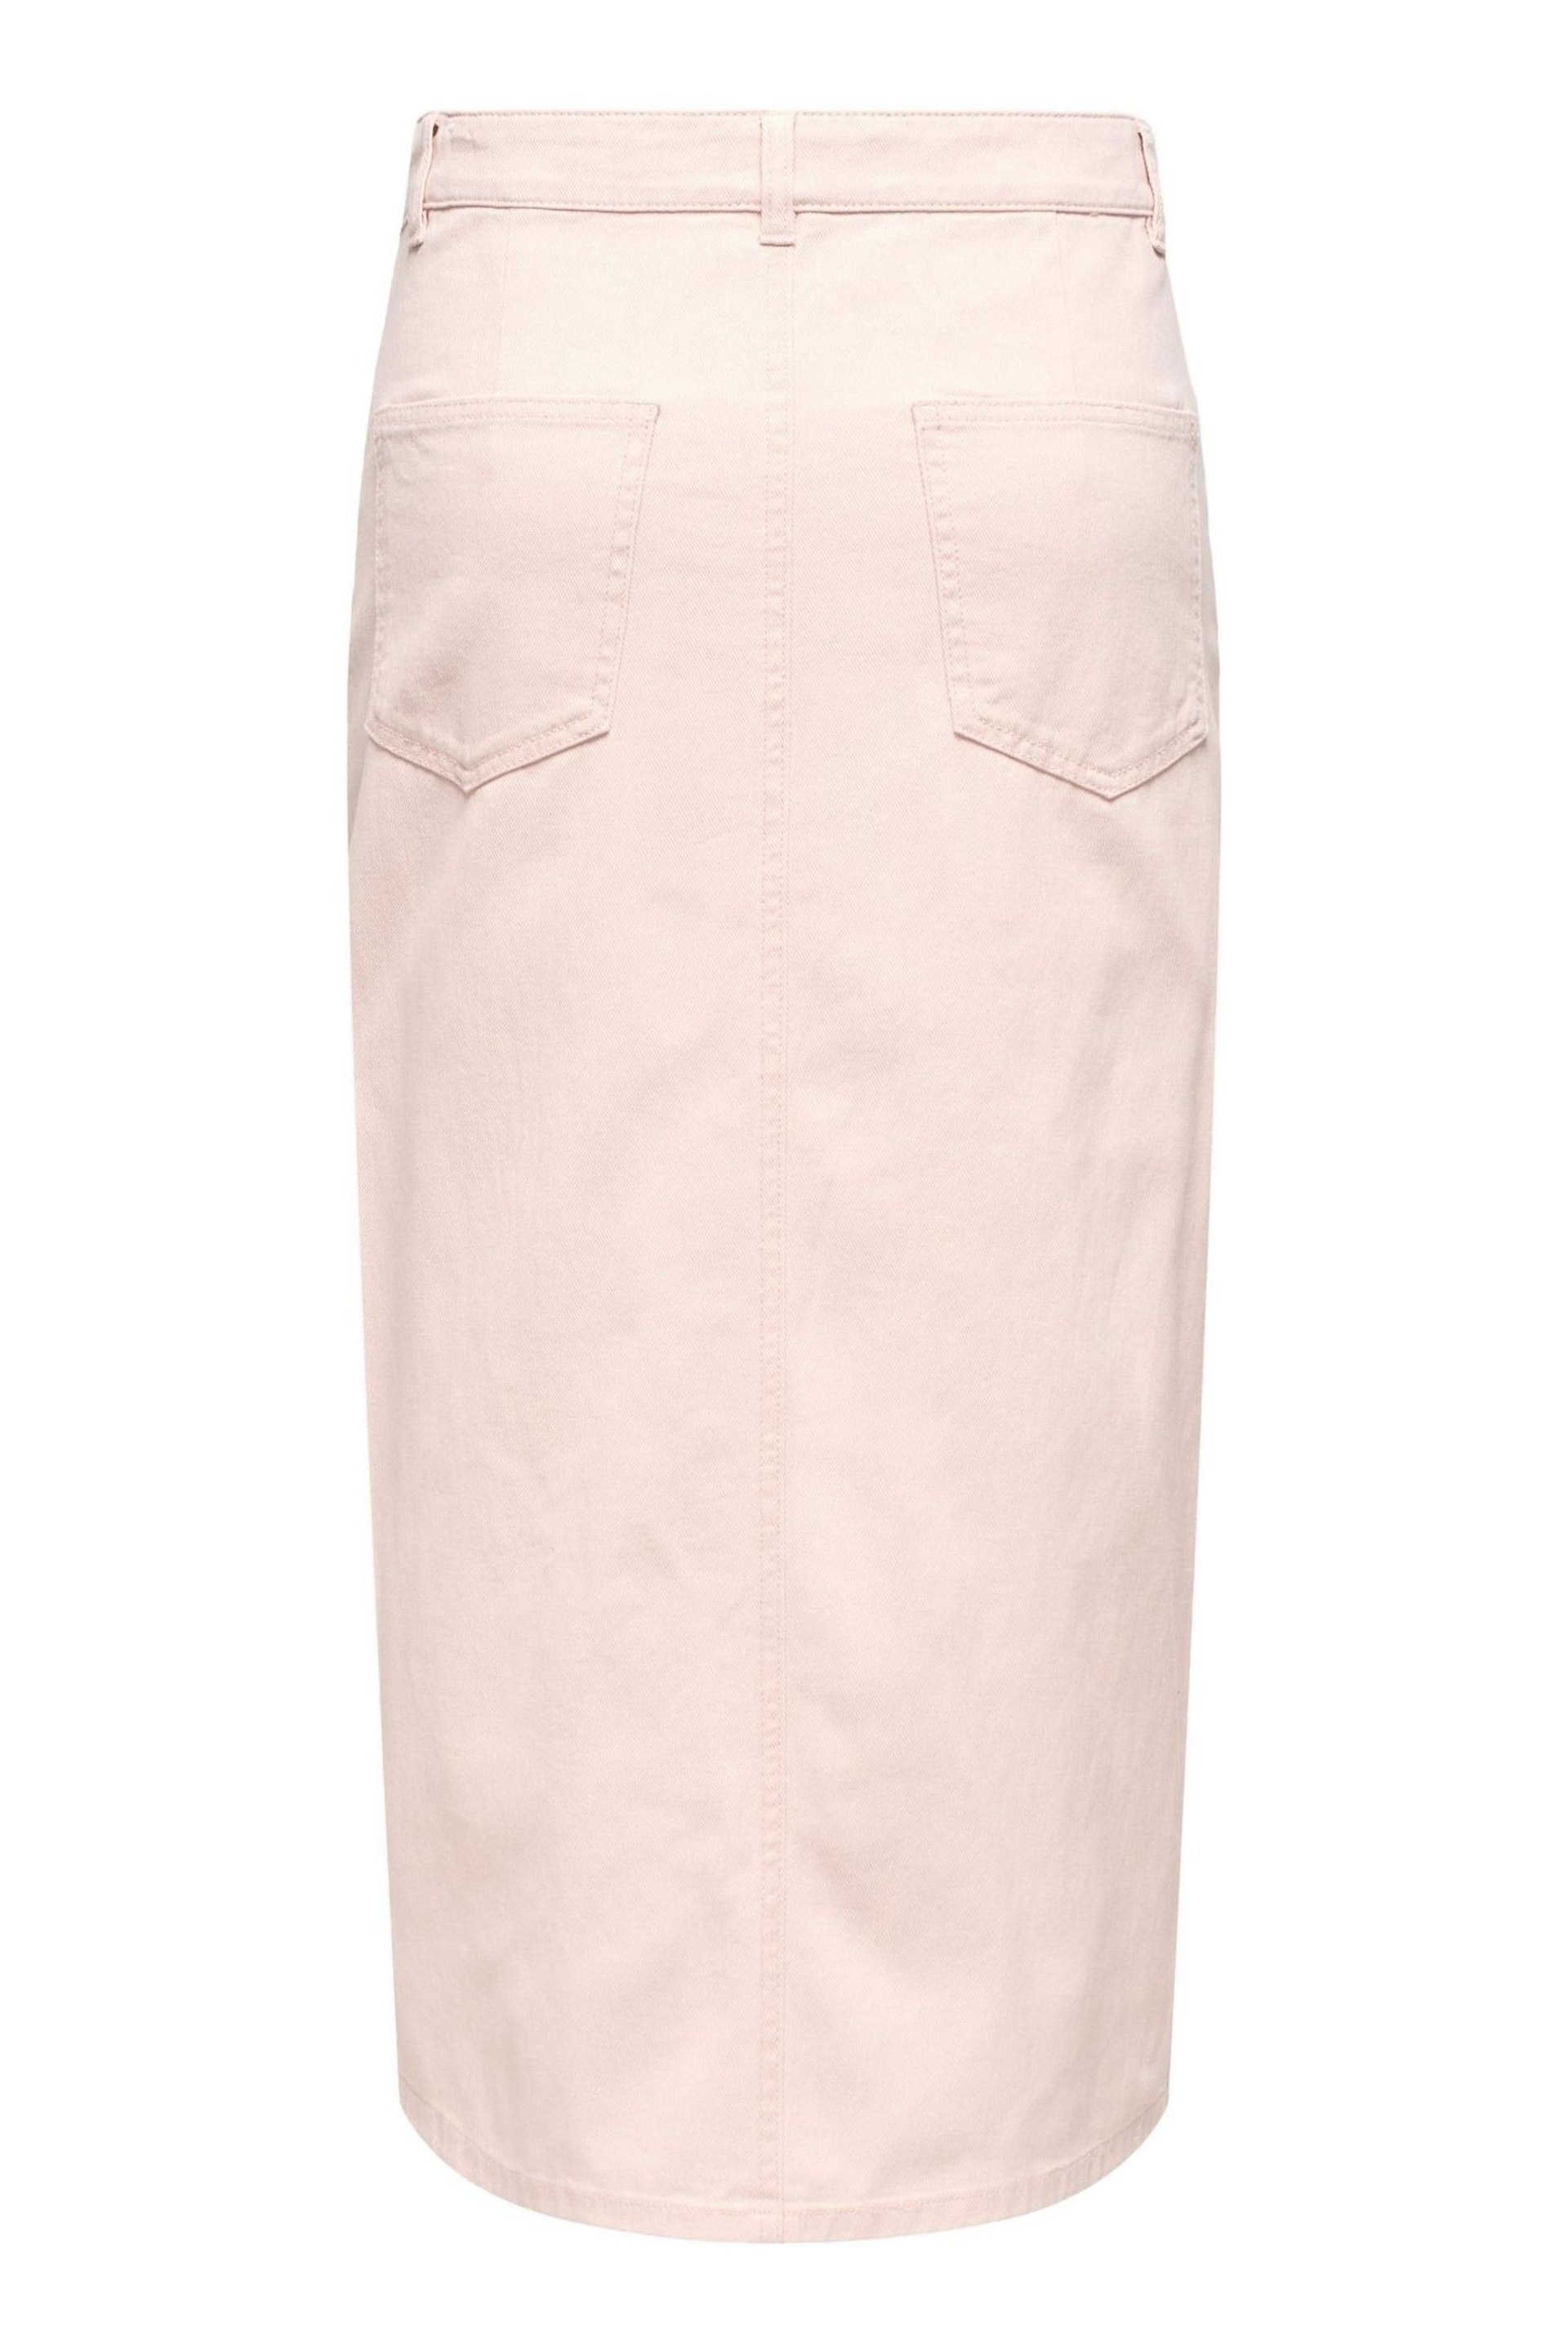 ONLY Pink Denim Midi Skirt With Front Split - Image 5 of 5